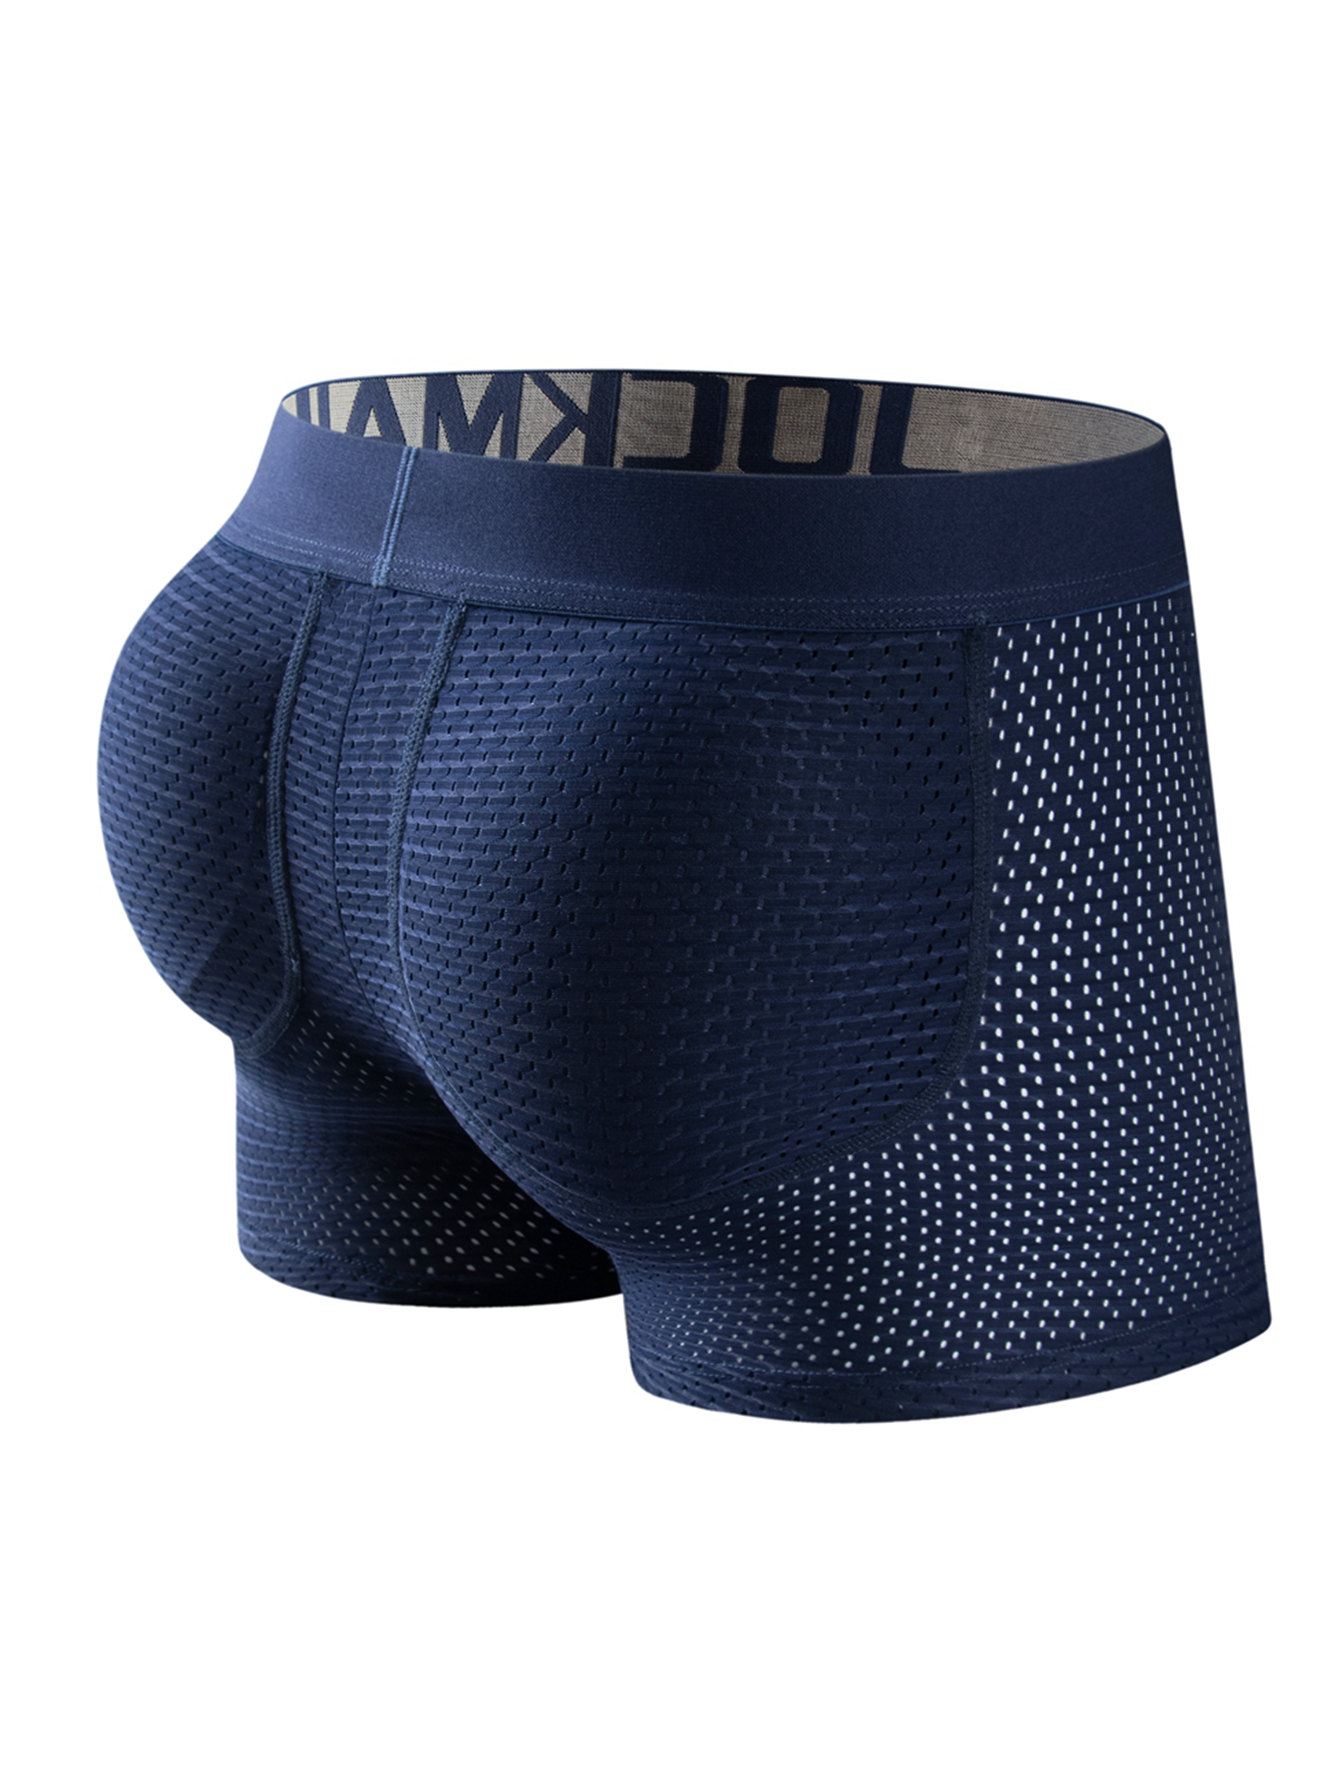 Men's Modal Thin Breathable Comfy Stretchy Boxer Briefs Sexy